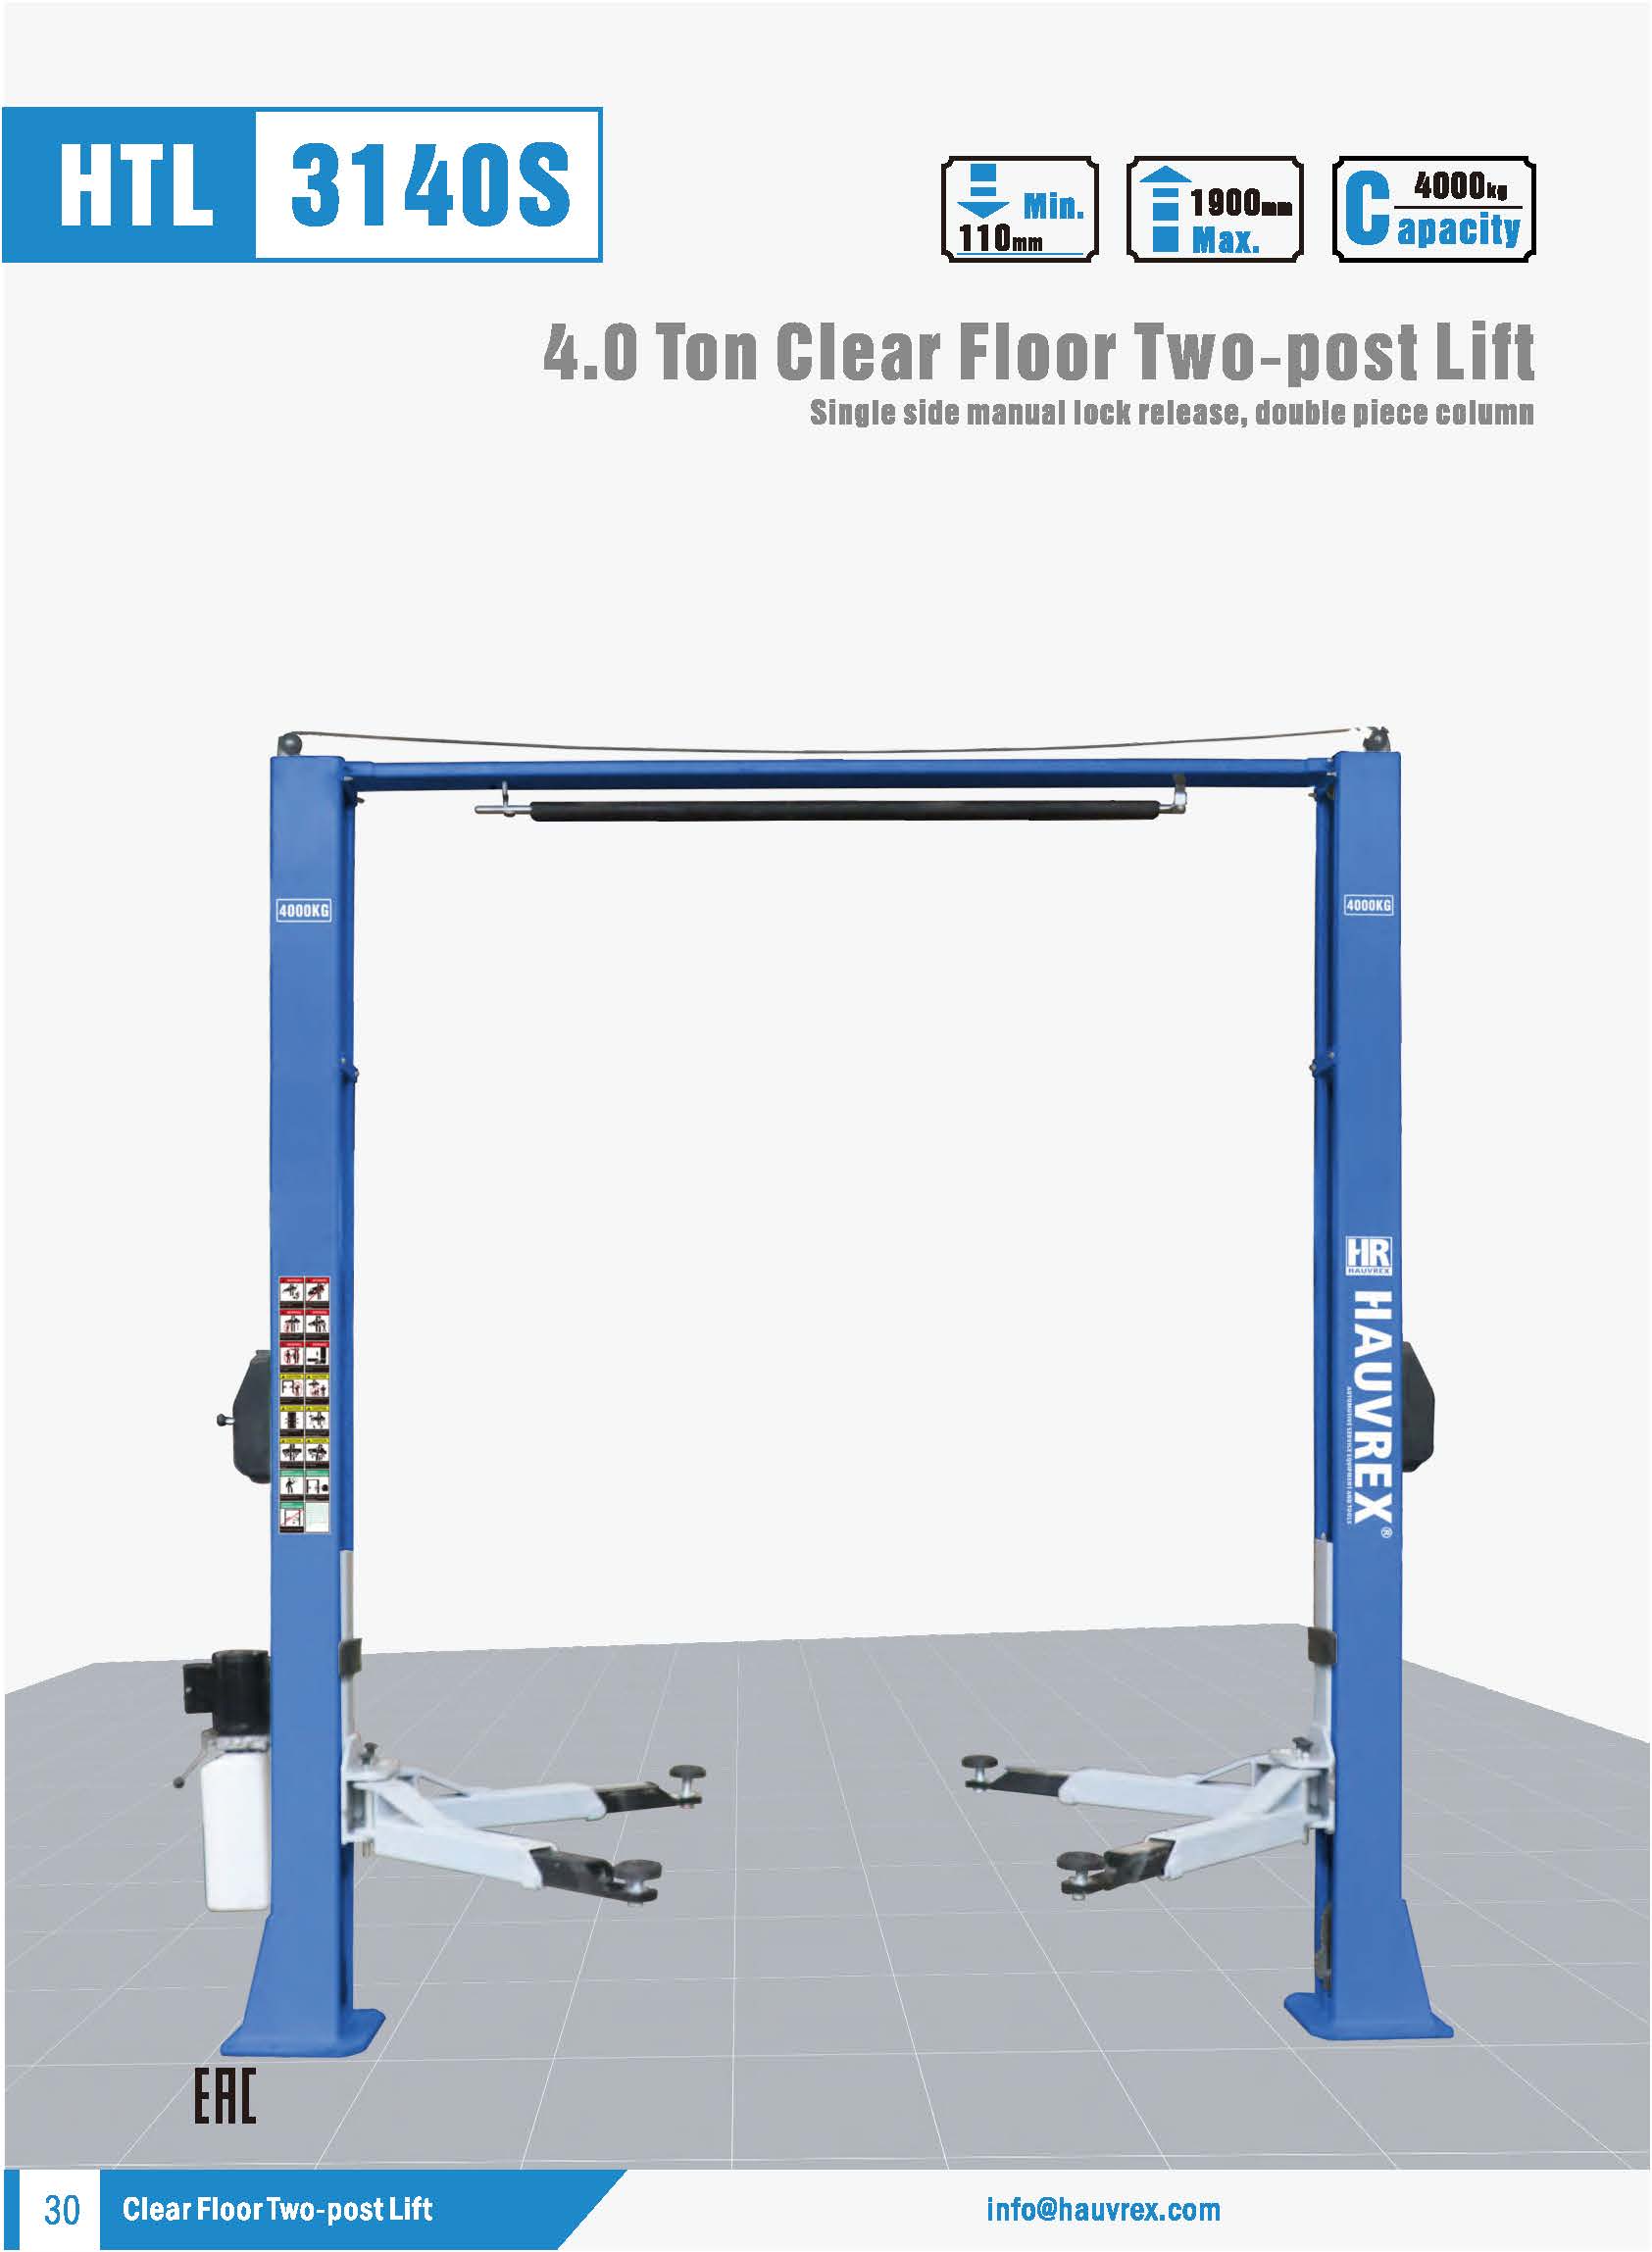 HTL3140S Two-post Lift